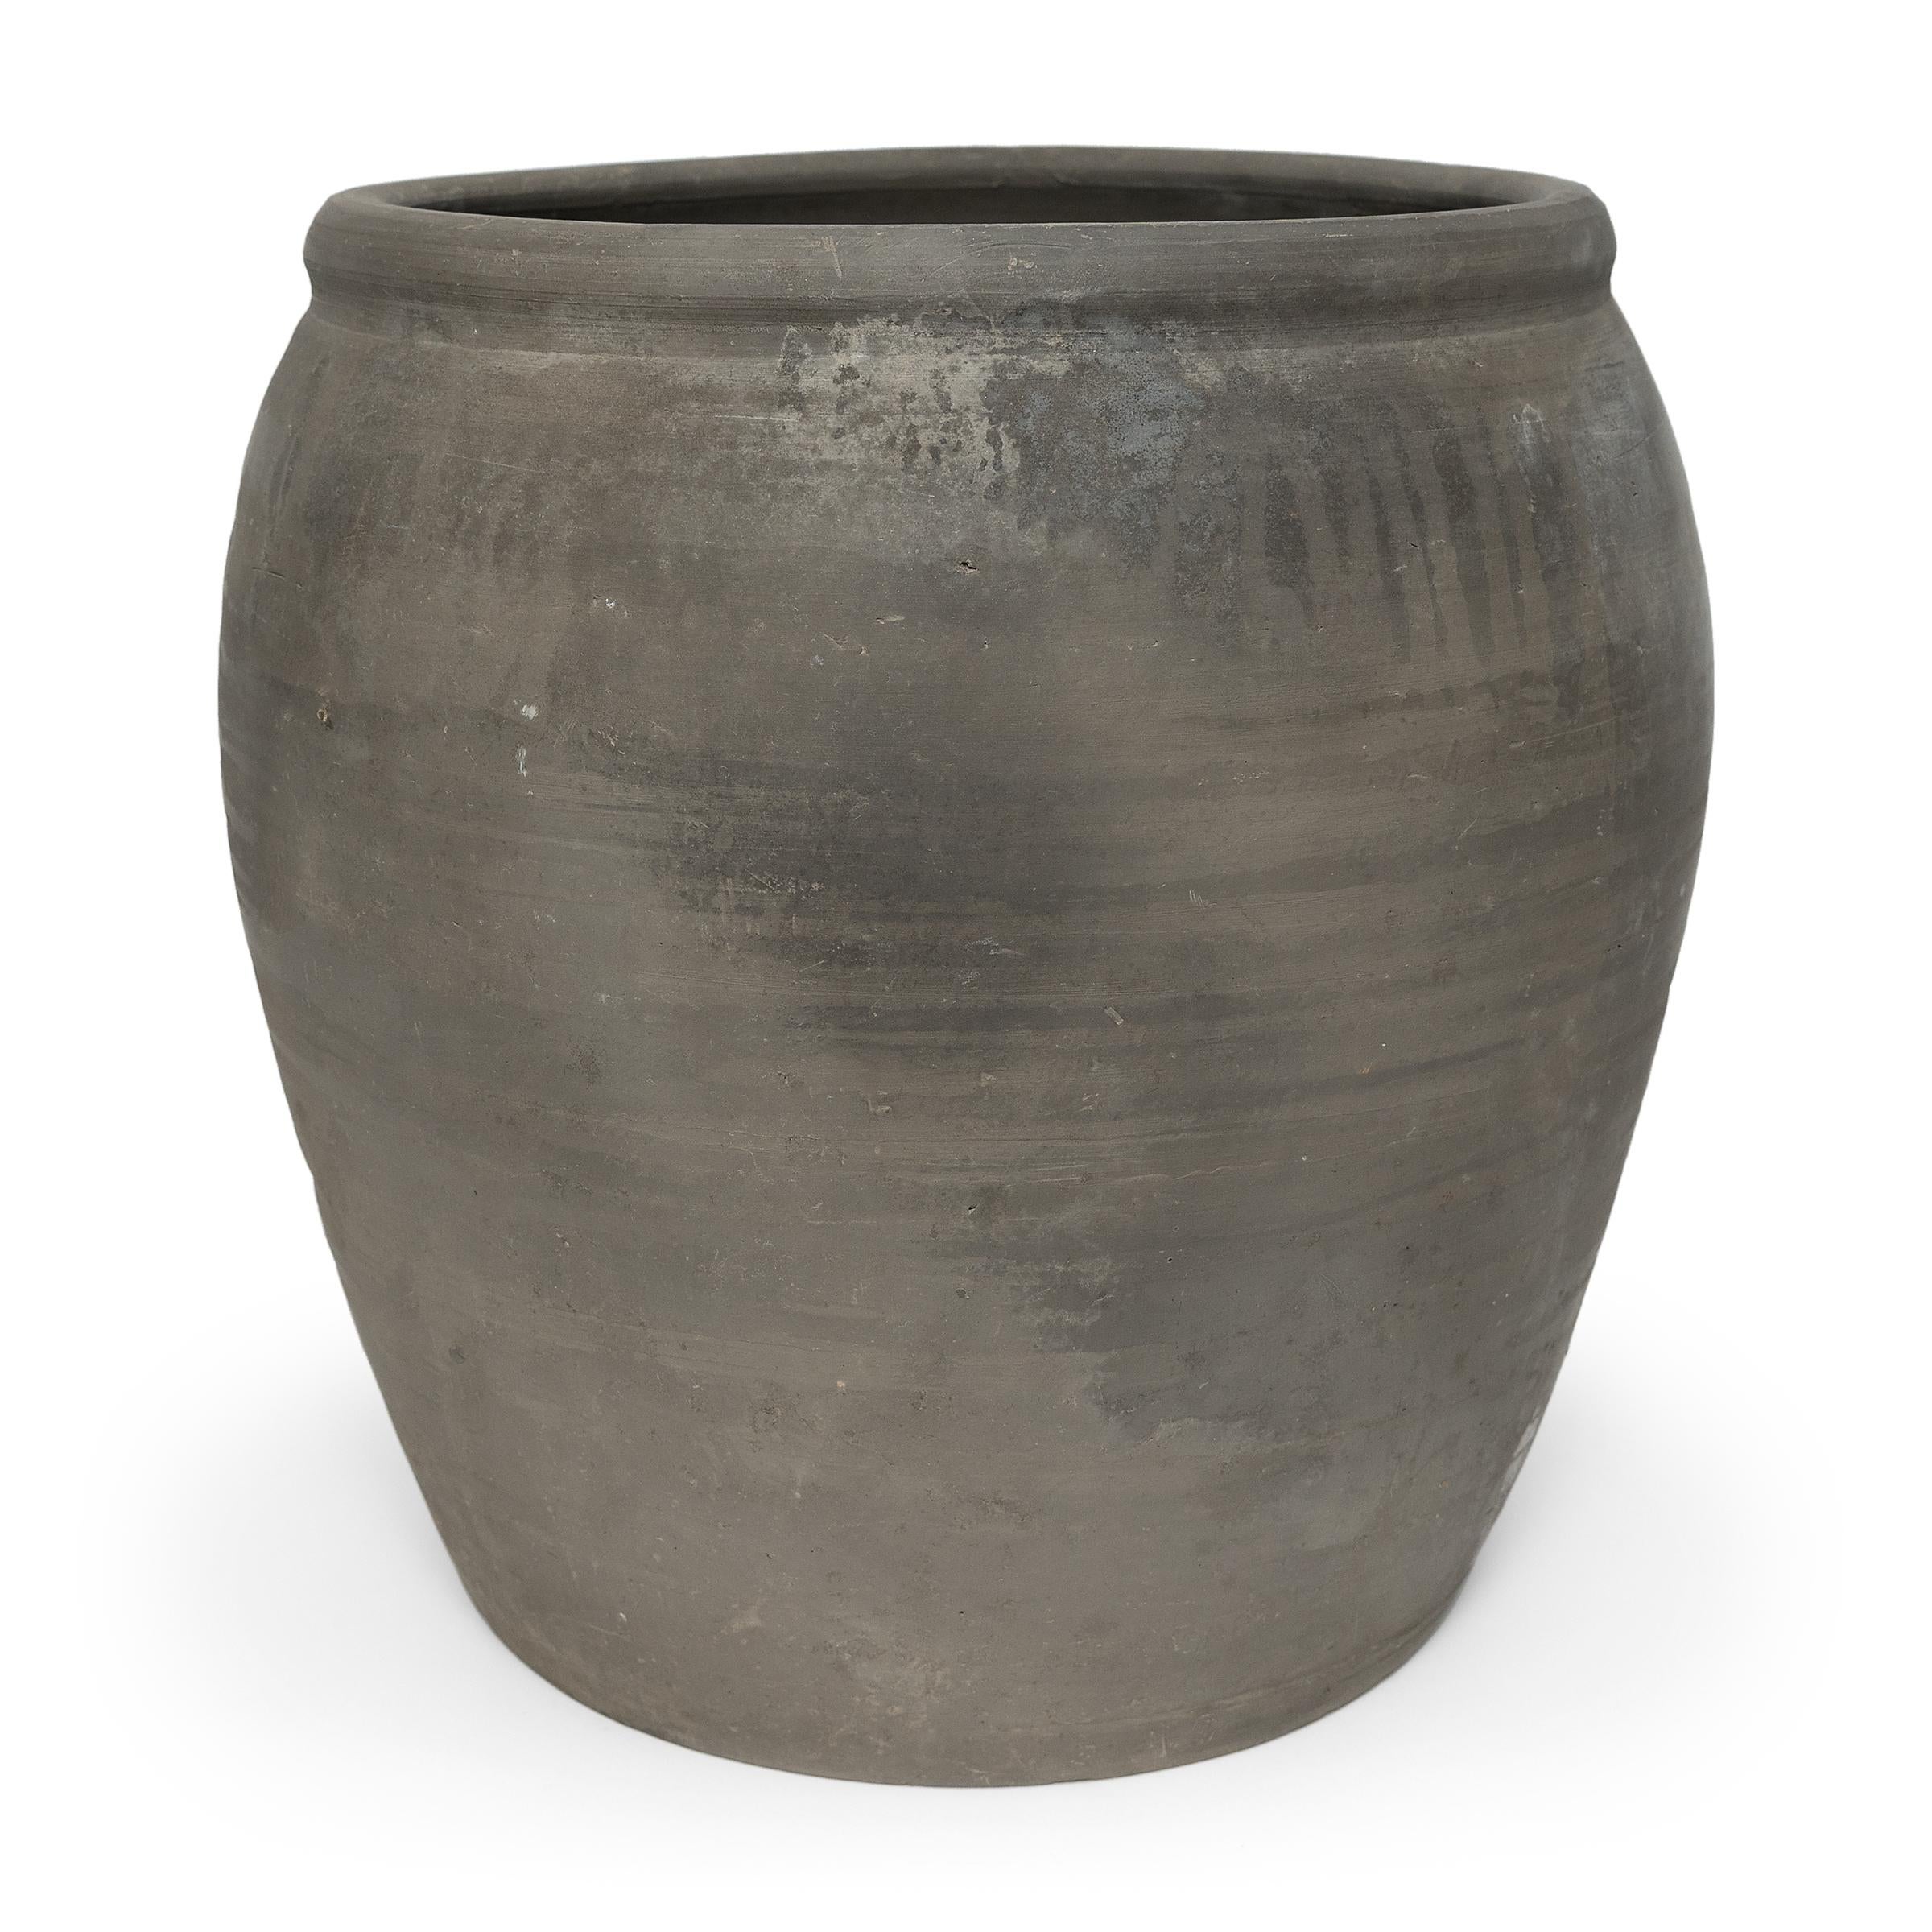 Sculpted during the early 20th century in China's Shanxi province, this vessel has a smoky grey-black exterior with a beautifully irregular unglazed surface. Charged with the humble task of storing dry goods, this tall earthenware jar has a tapered